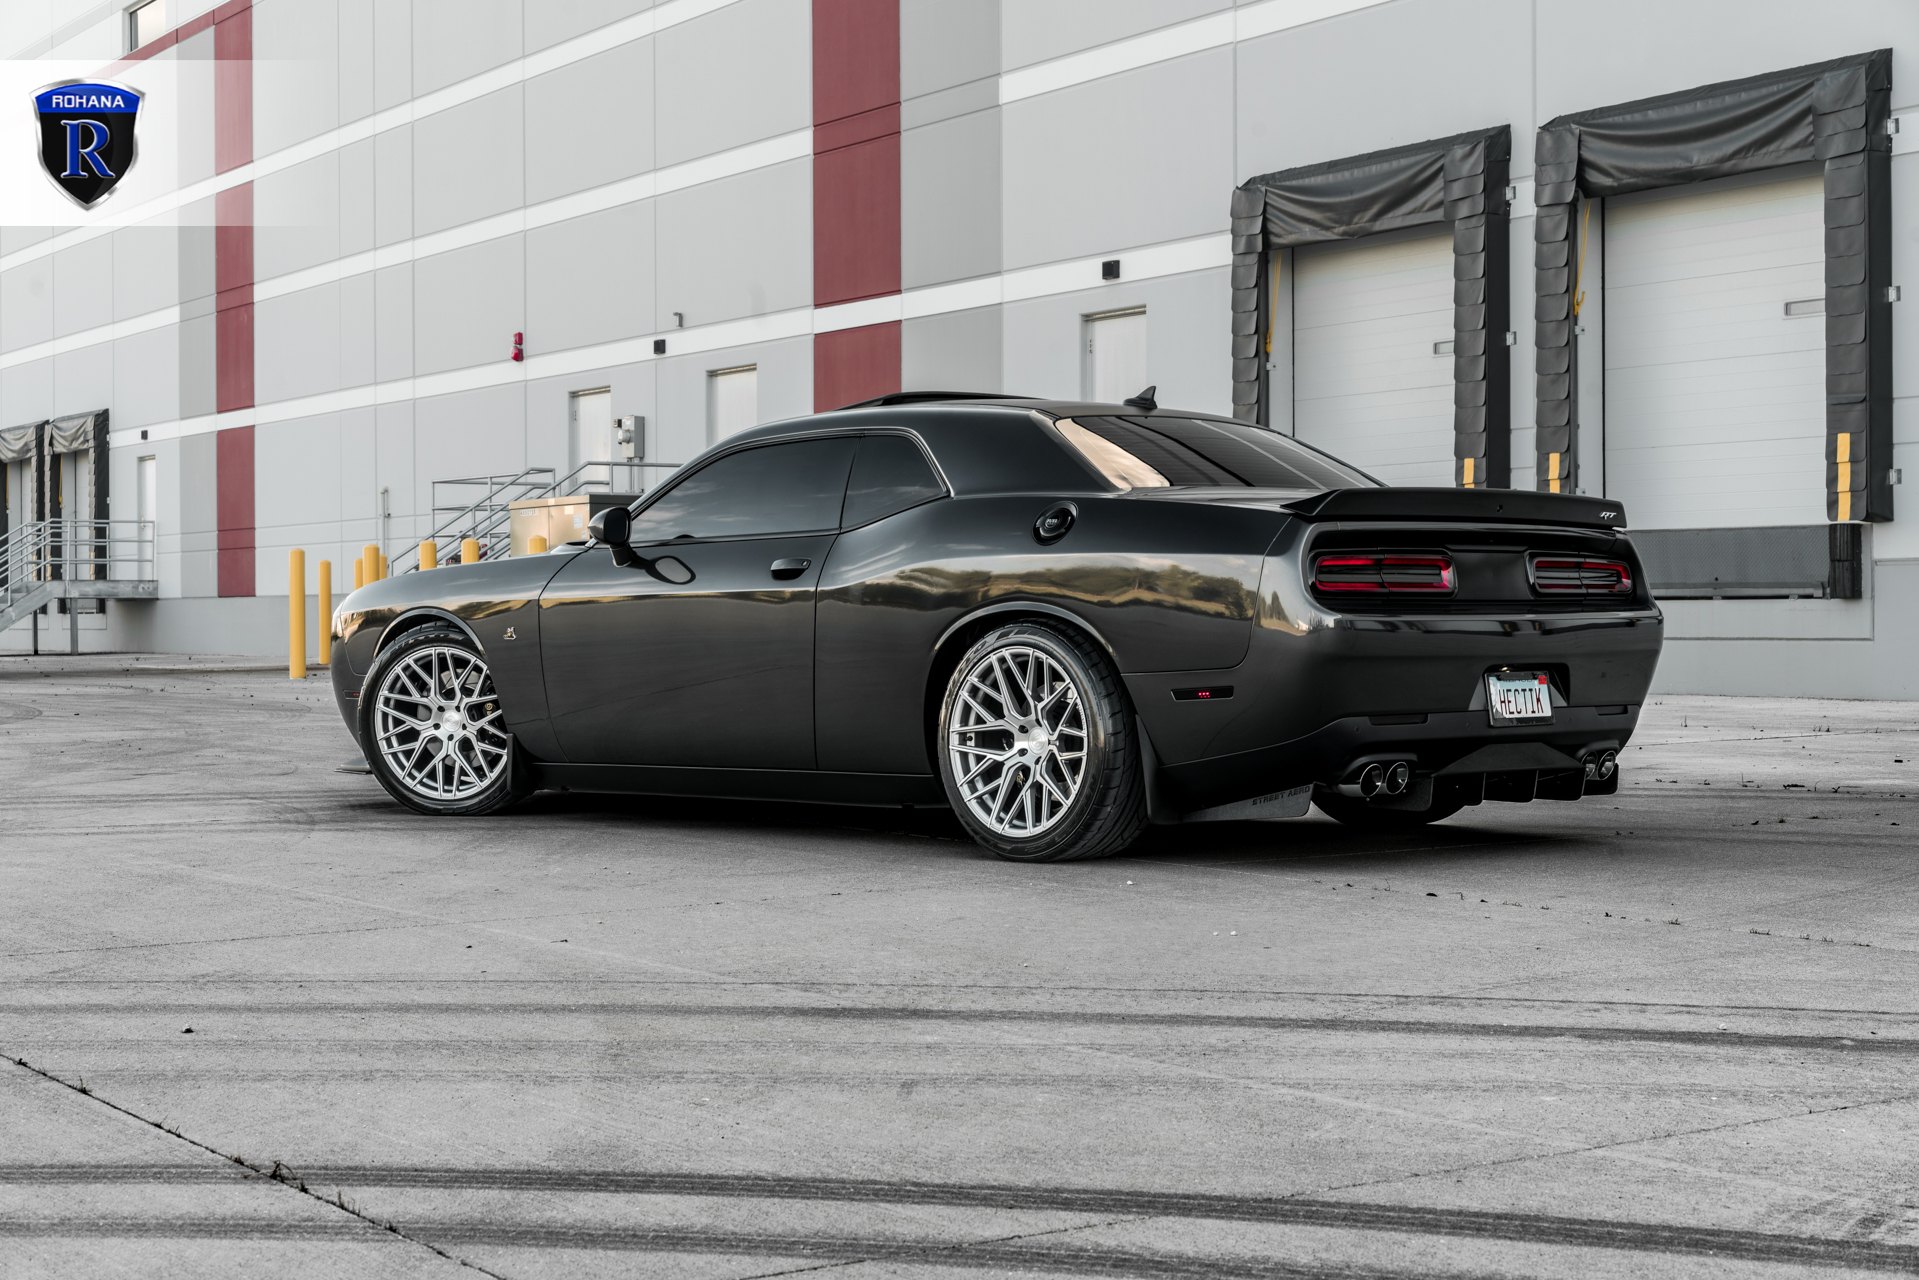 Gray Dodge Challenger with Aftermarket Rear Spoiler - Photo by Rohana Wheels